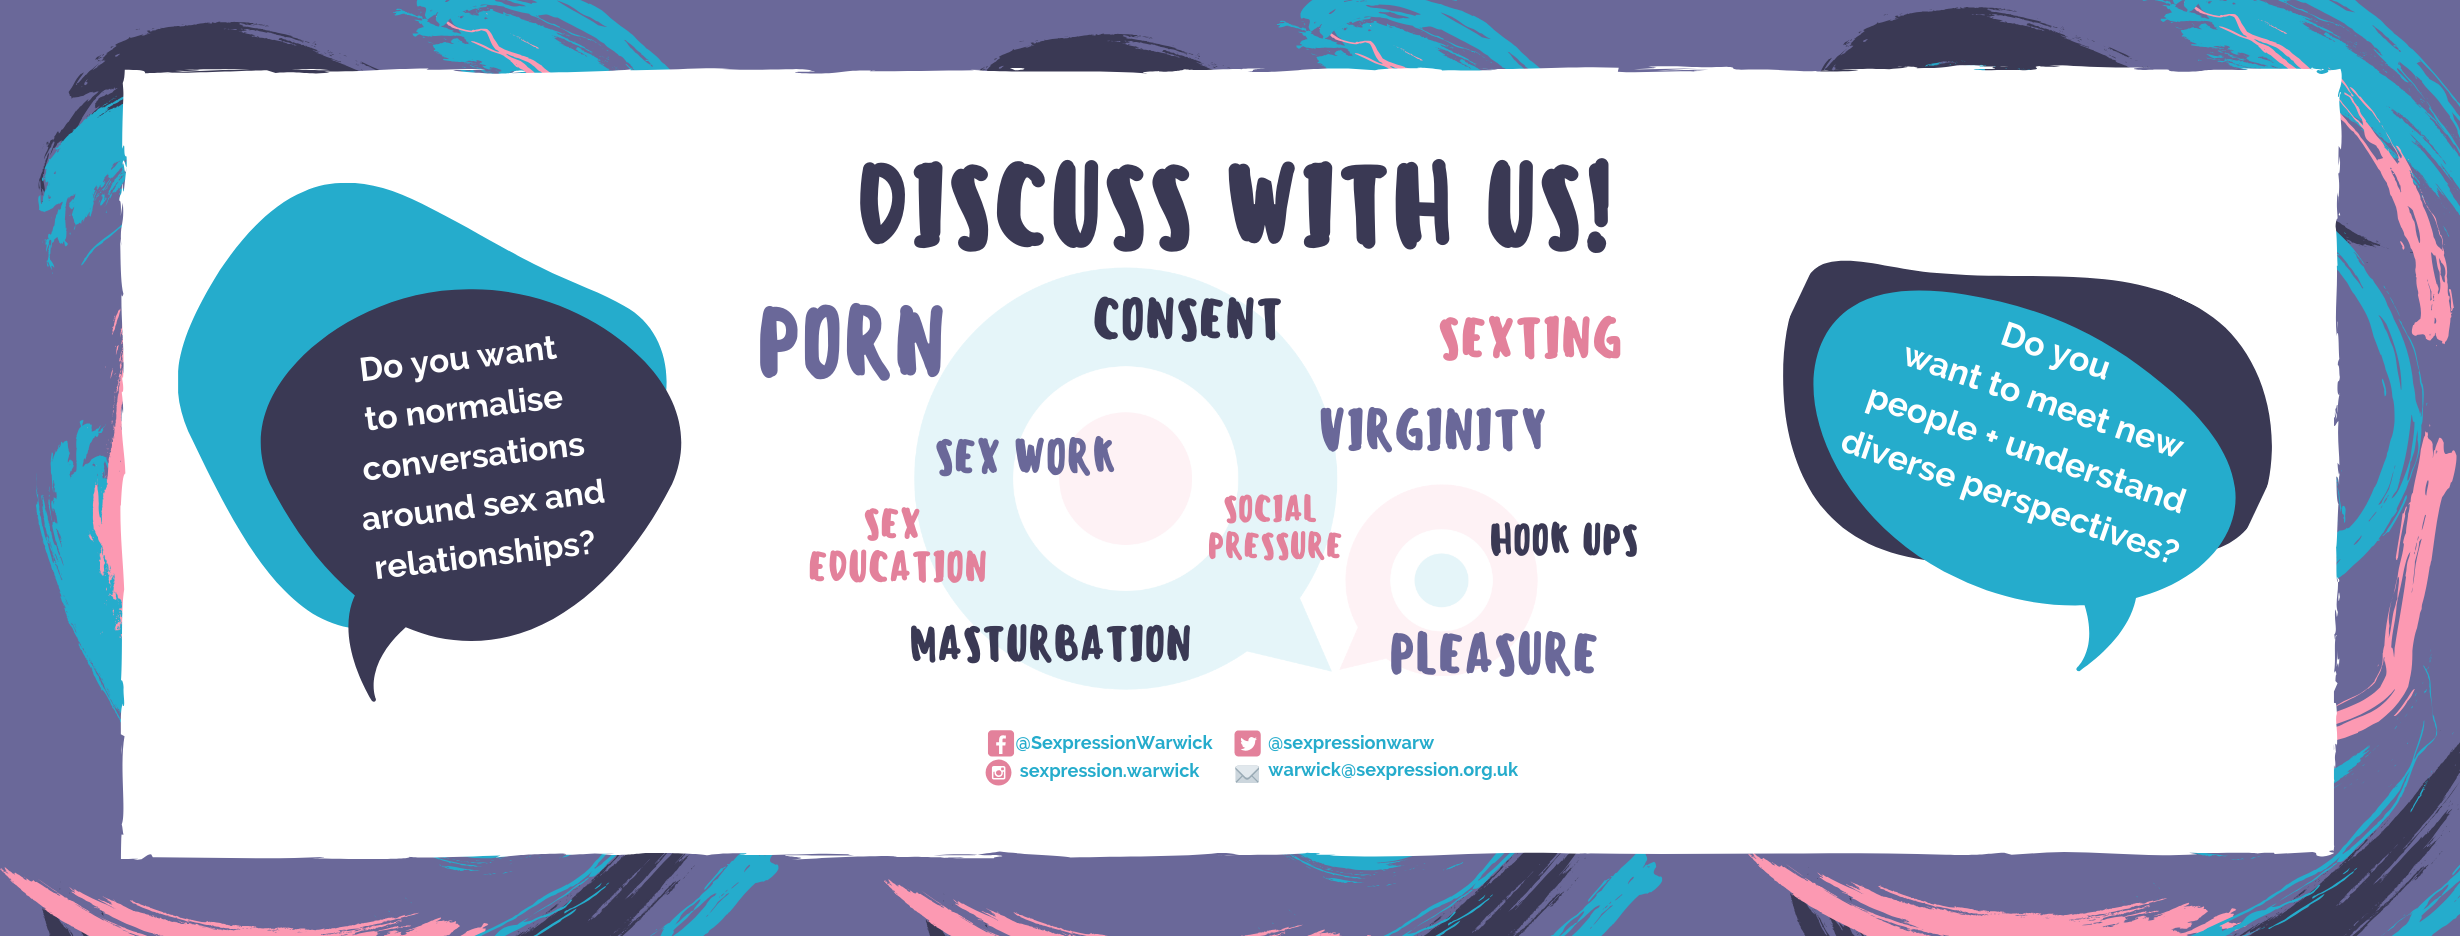 Discuss with Us banner